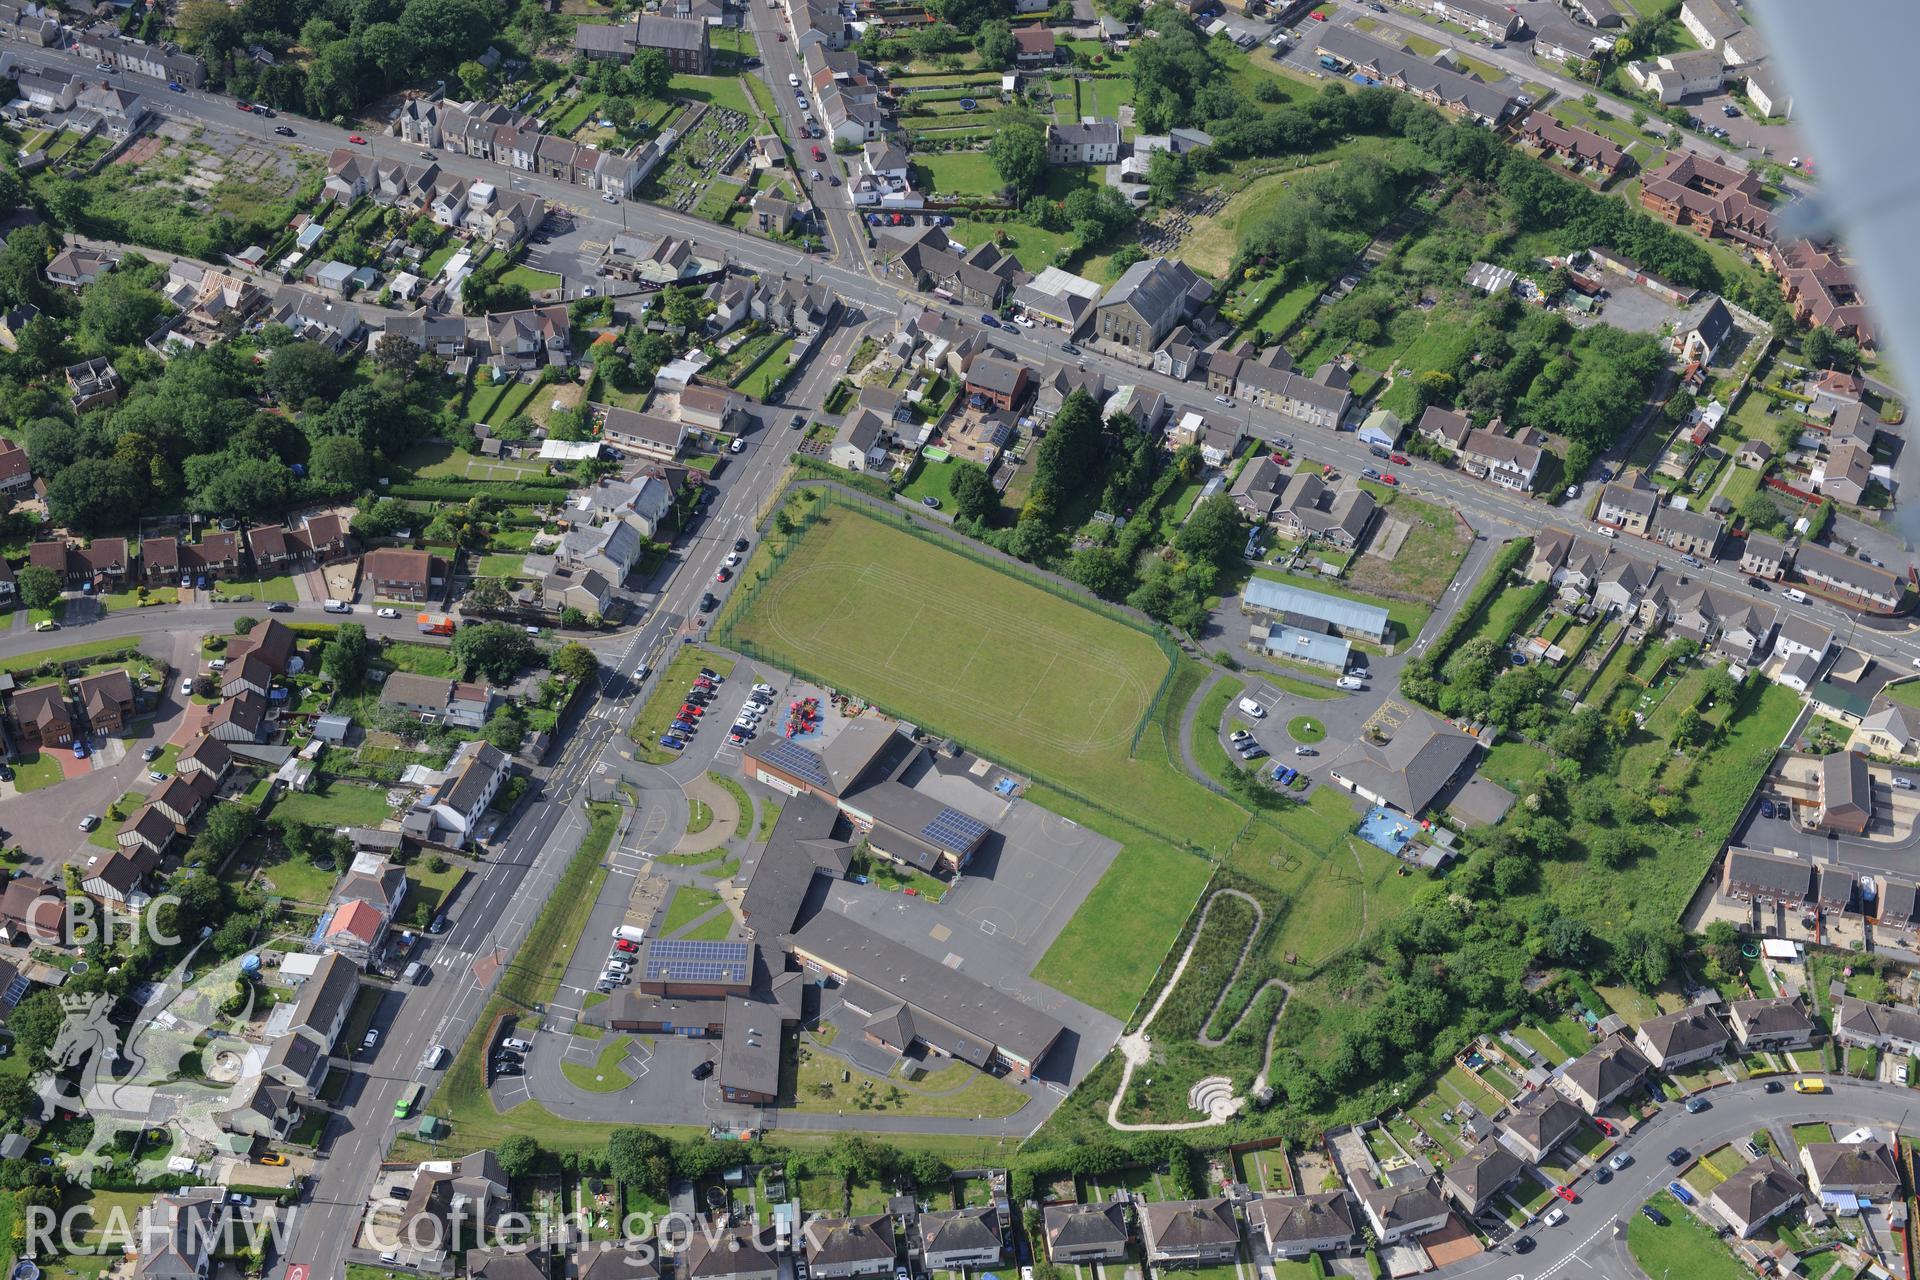 Brynteg Primary School and Tabernacl Welsh Baptist Church, Llwynhendy, Llanelli. Oblique aerial photograph taken during the Royal Commission's programme of archaeological aerial reconnaissance by Toby Driver on 19th June 2015.